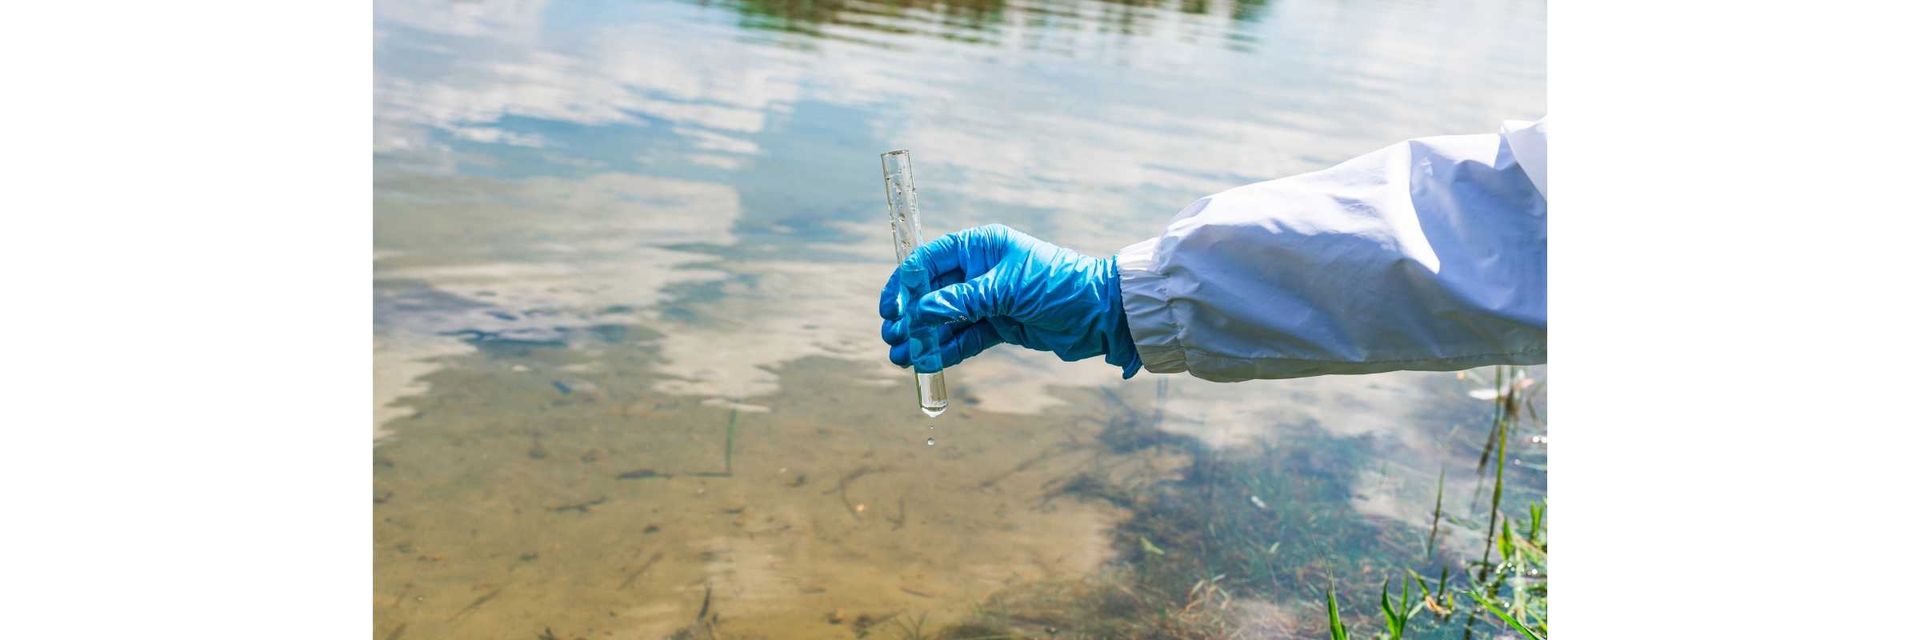 arm with a medical glove and white lab coat holding a test tube over a stream